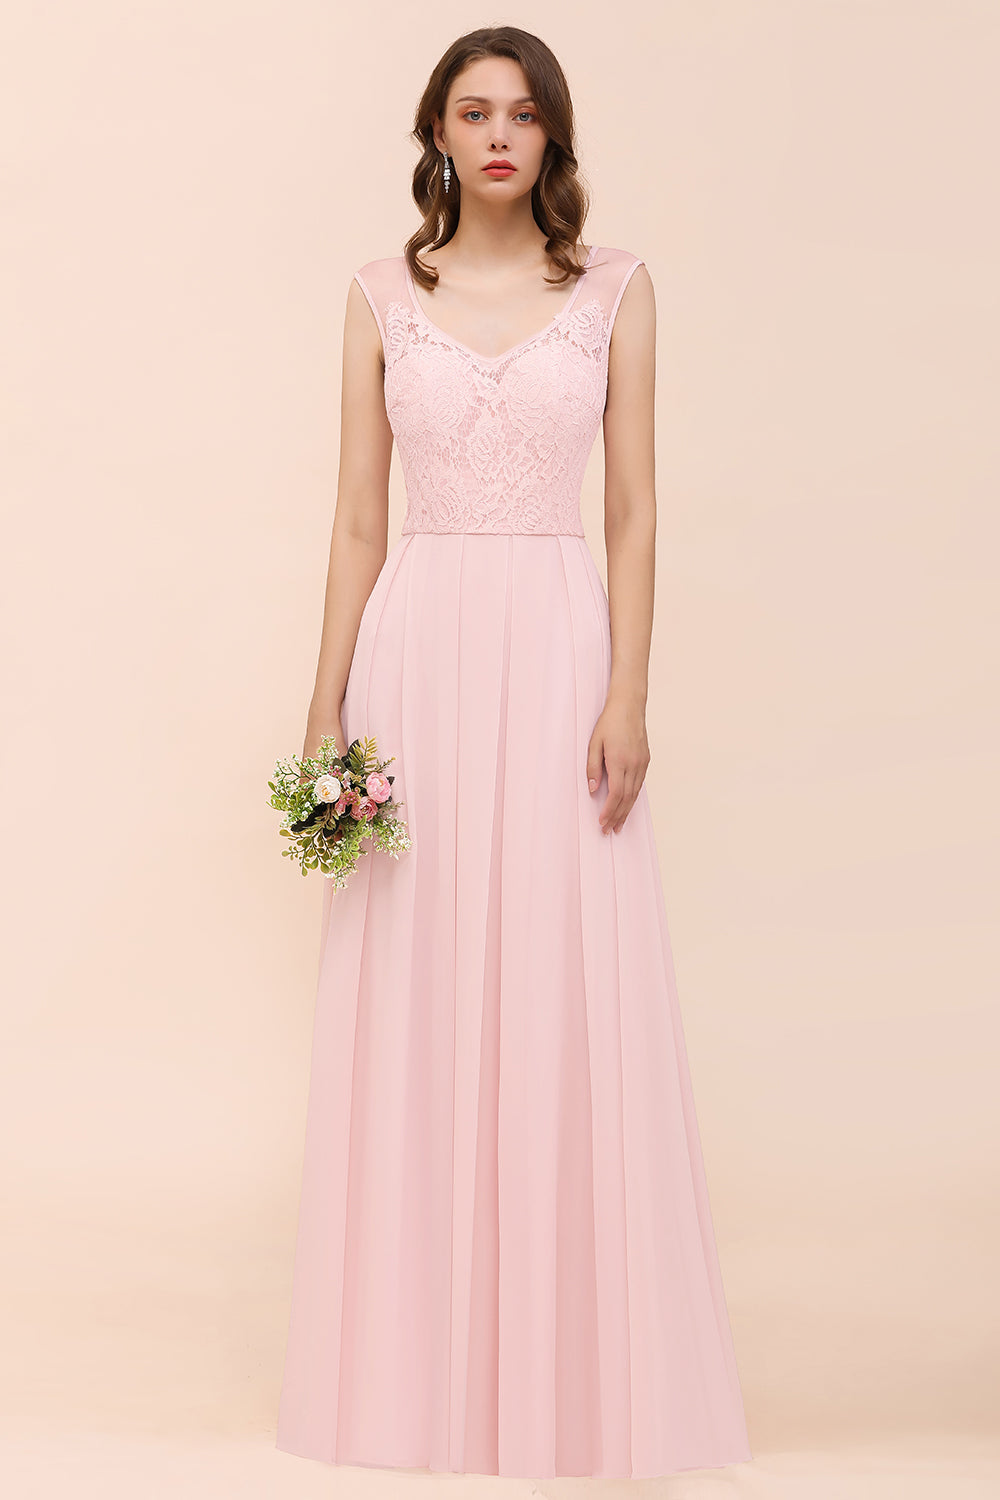 Load image into Gallery viewer, Elegant Pink Lace Straps Ruffle Affordable Bridesmaid Dress-27dress
